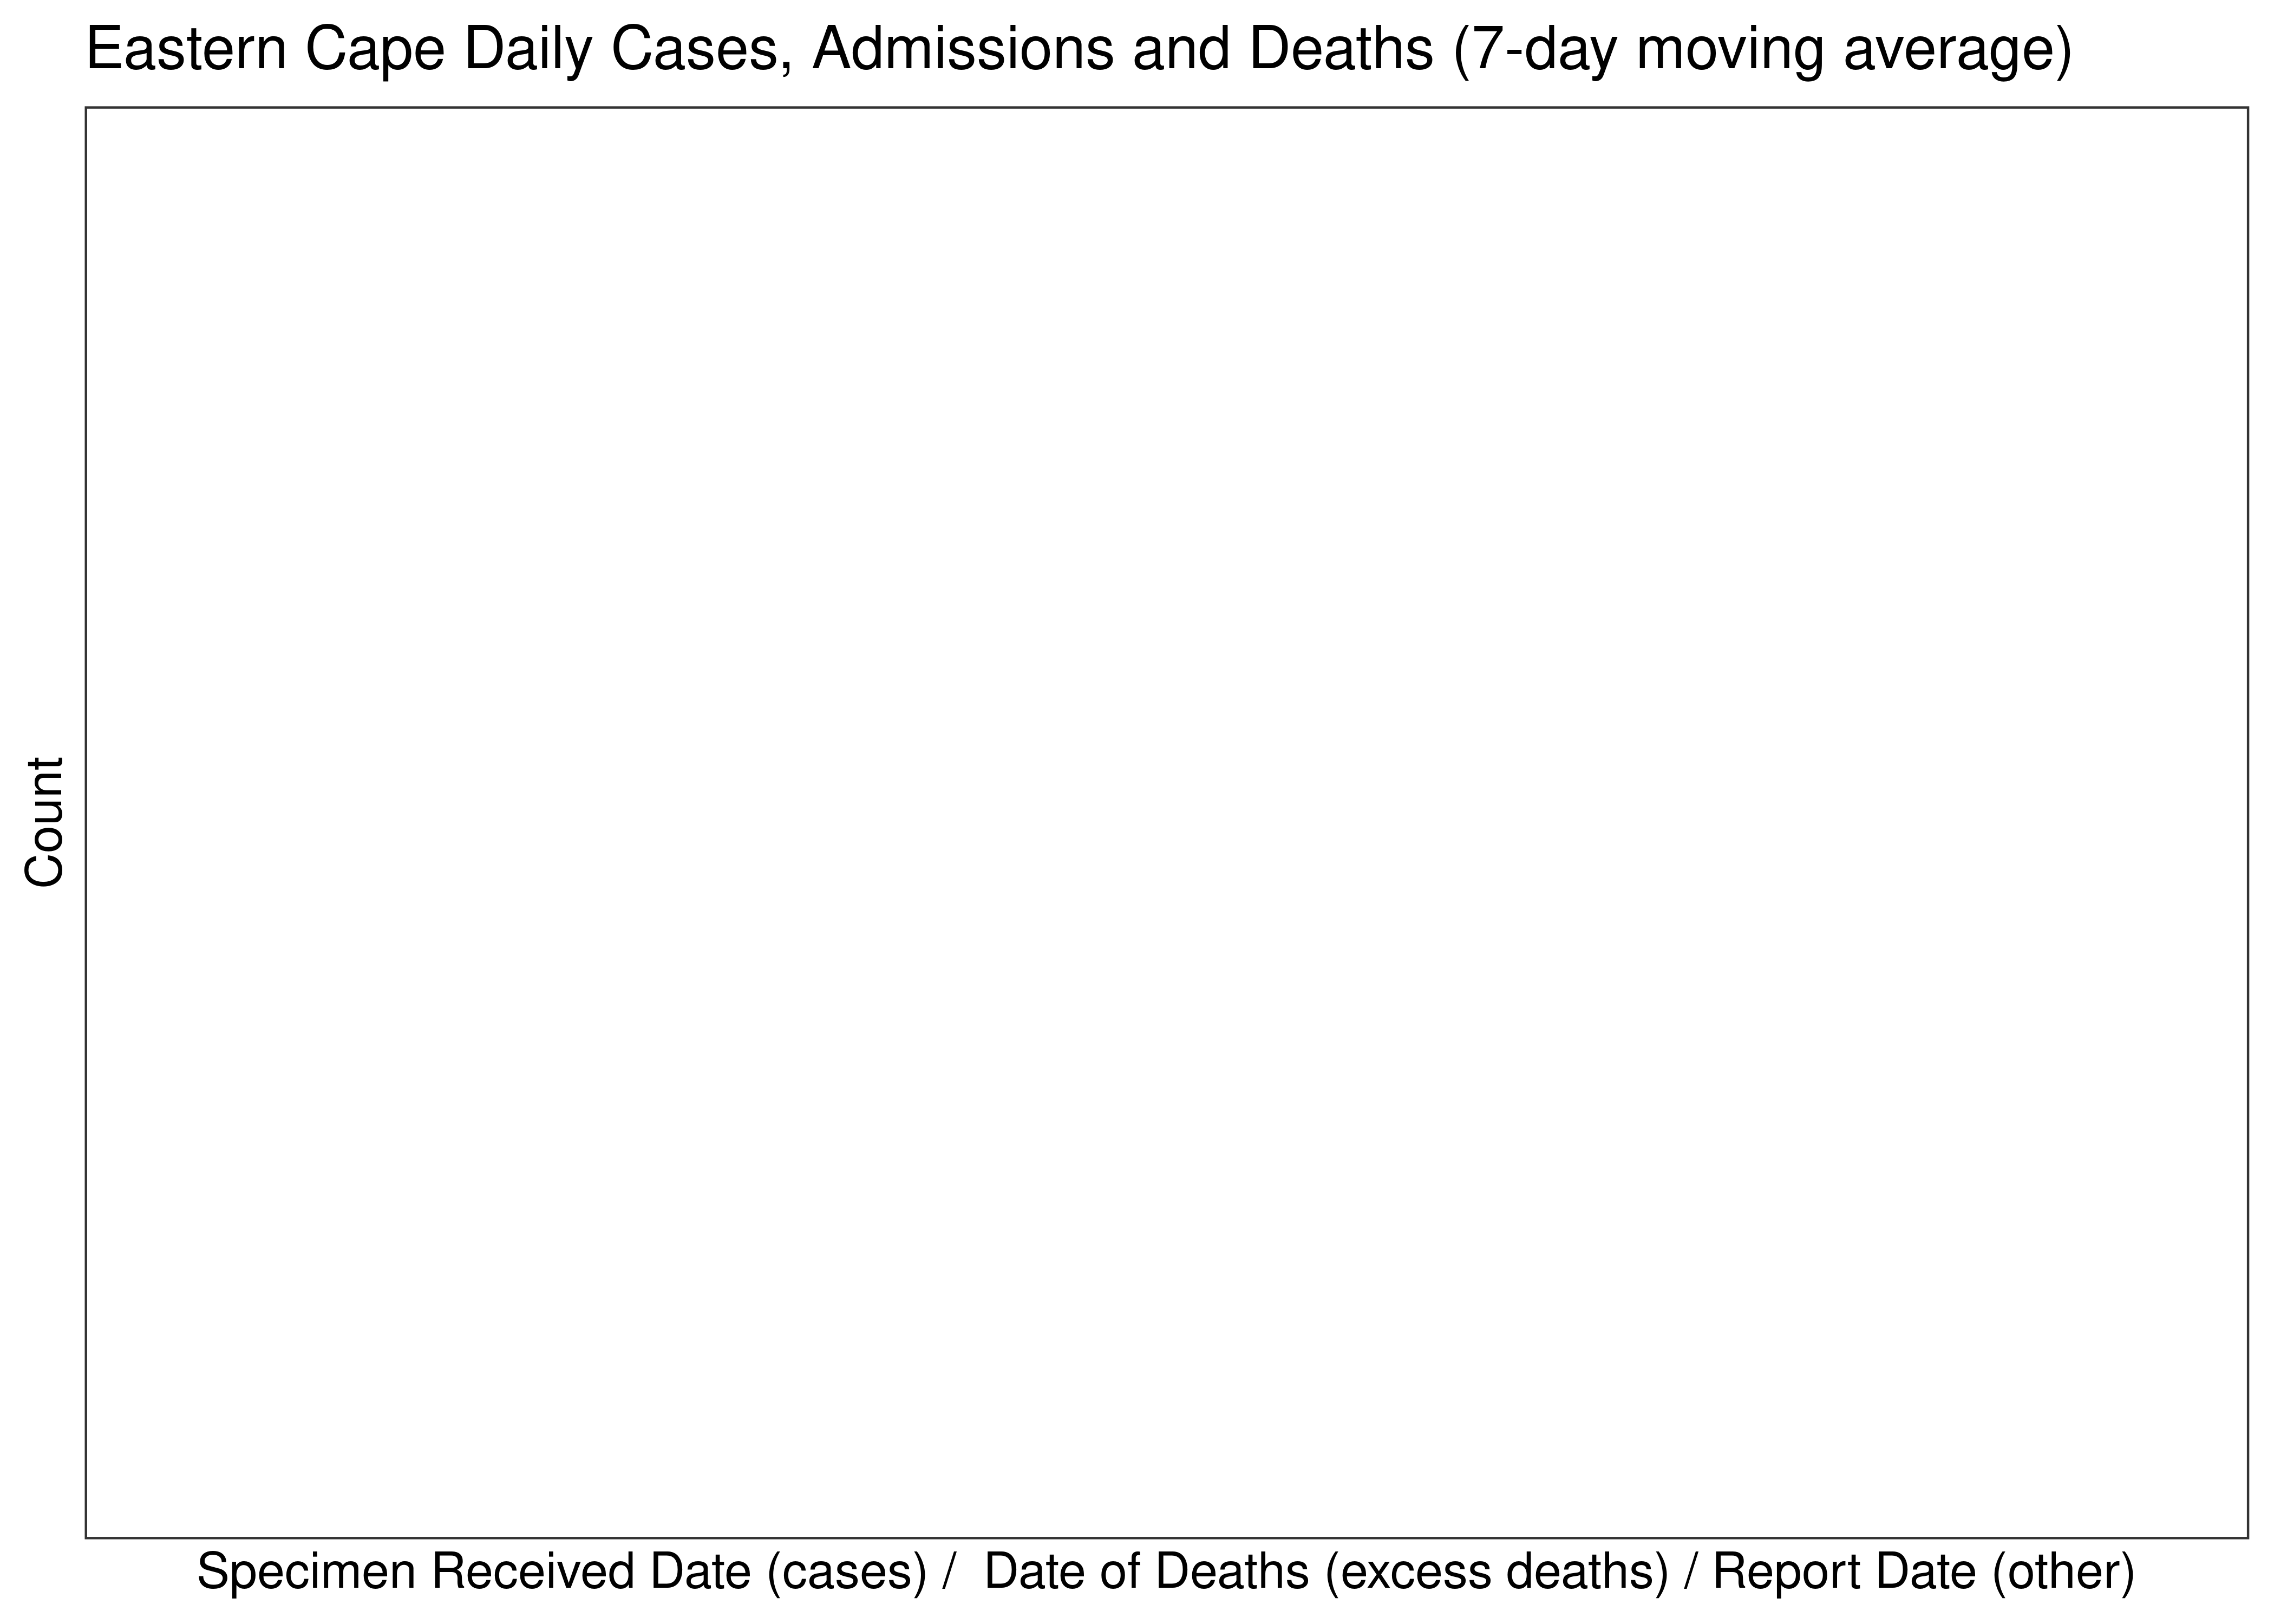 Eastern Cape Daily Cases, Admissions and Deaths for Last 30-days (7-day moving average)